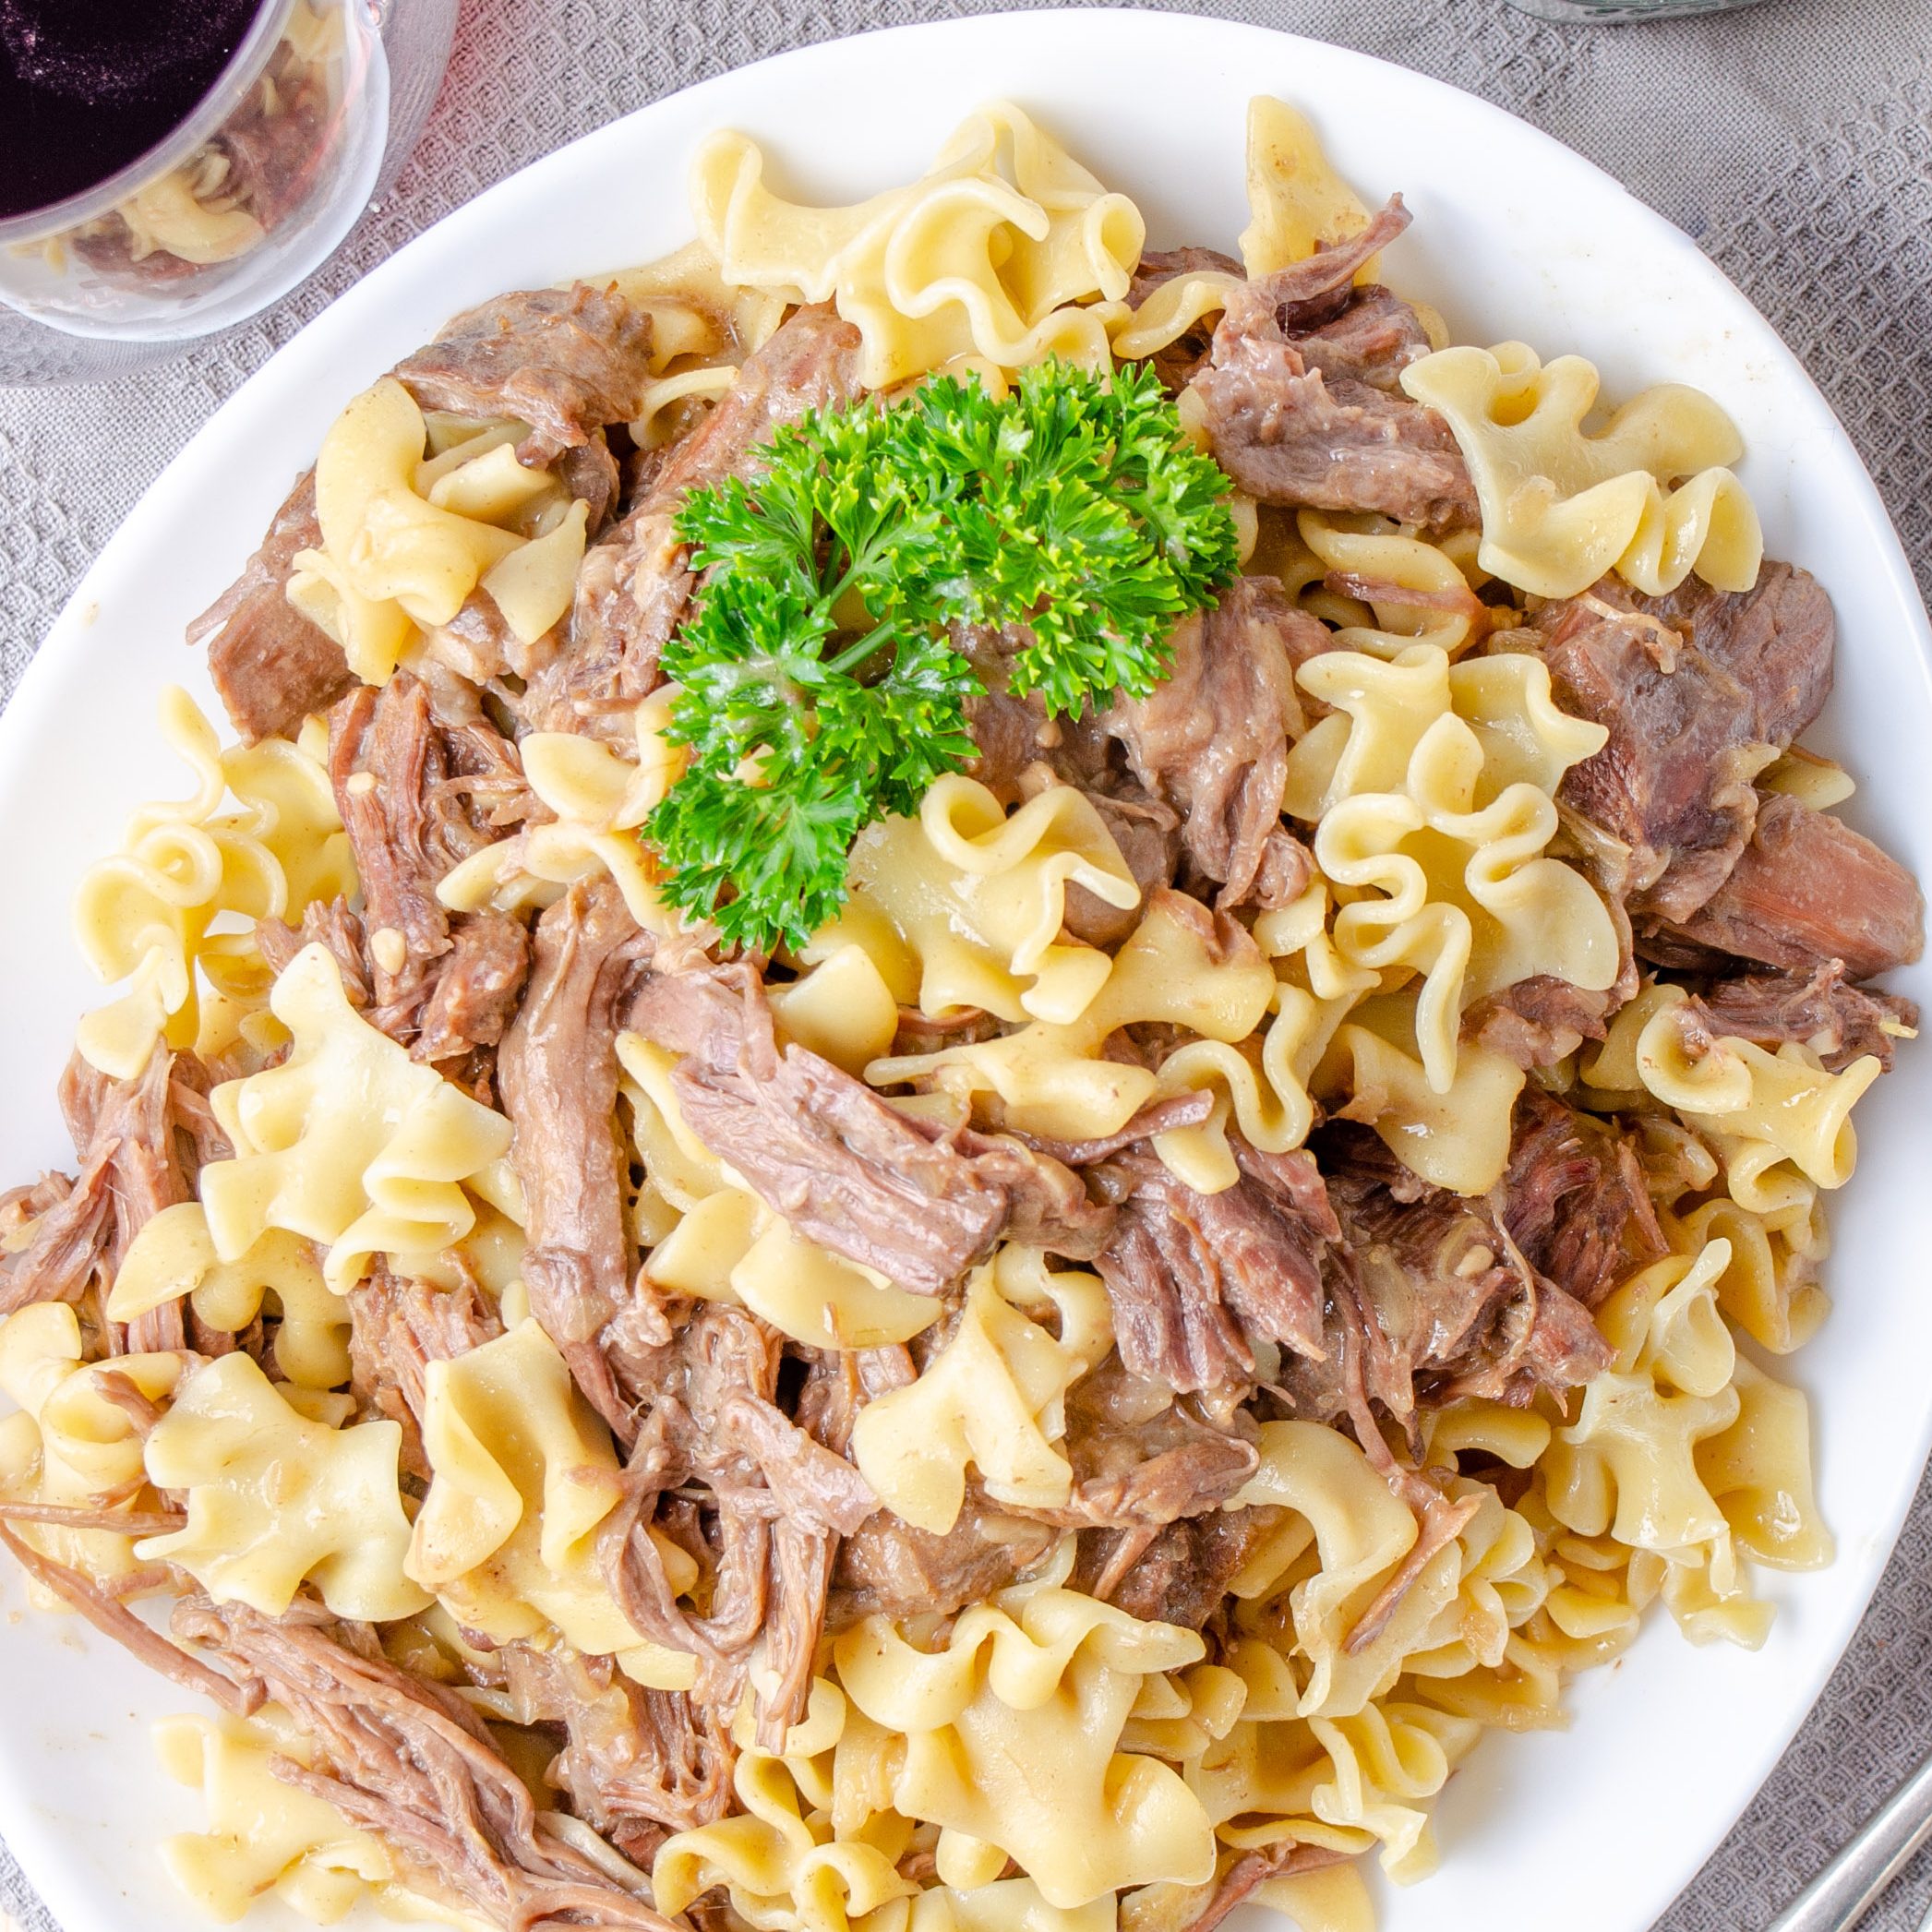 beef and noodles crockpot, beef and noodles recipe, crockpot beef and noodles